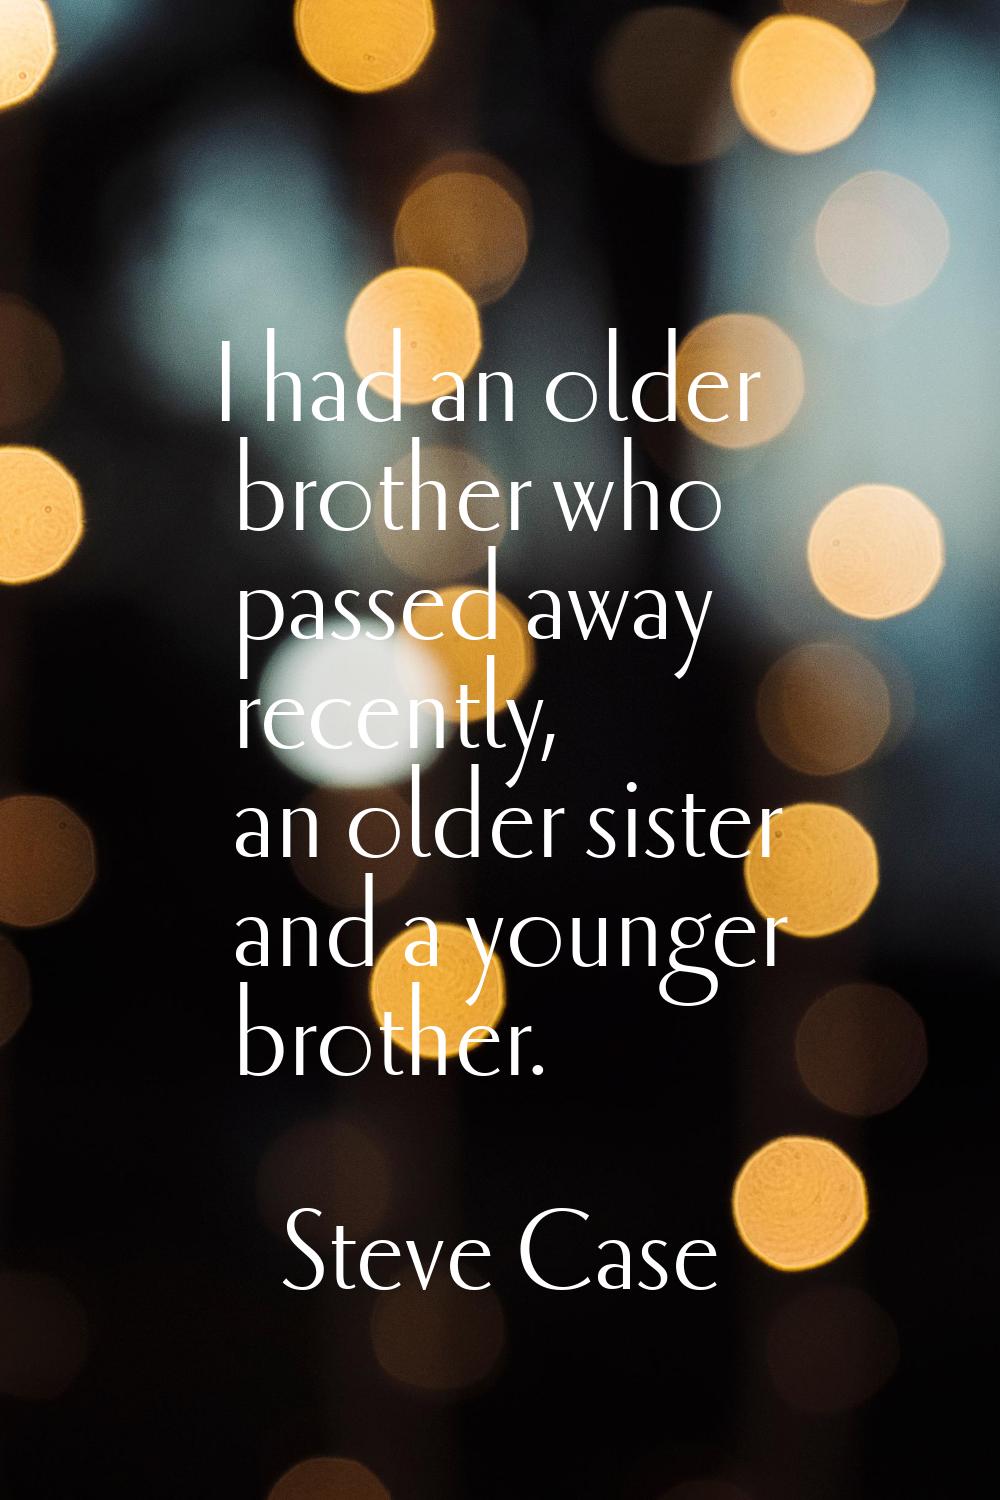 I had an older brother who passed away recently, an older sister and a younger brother.